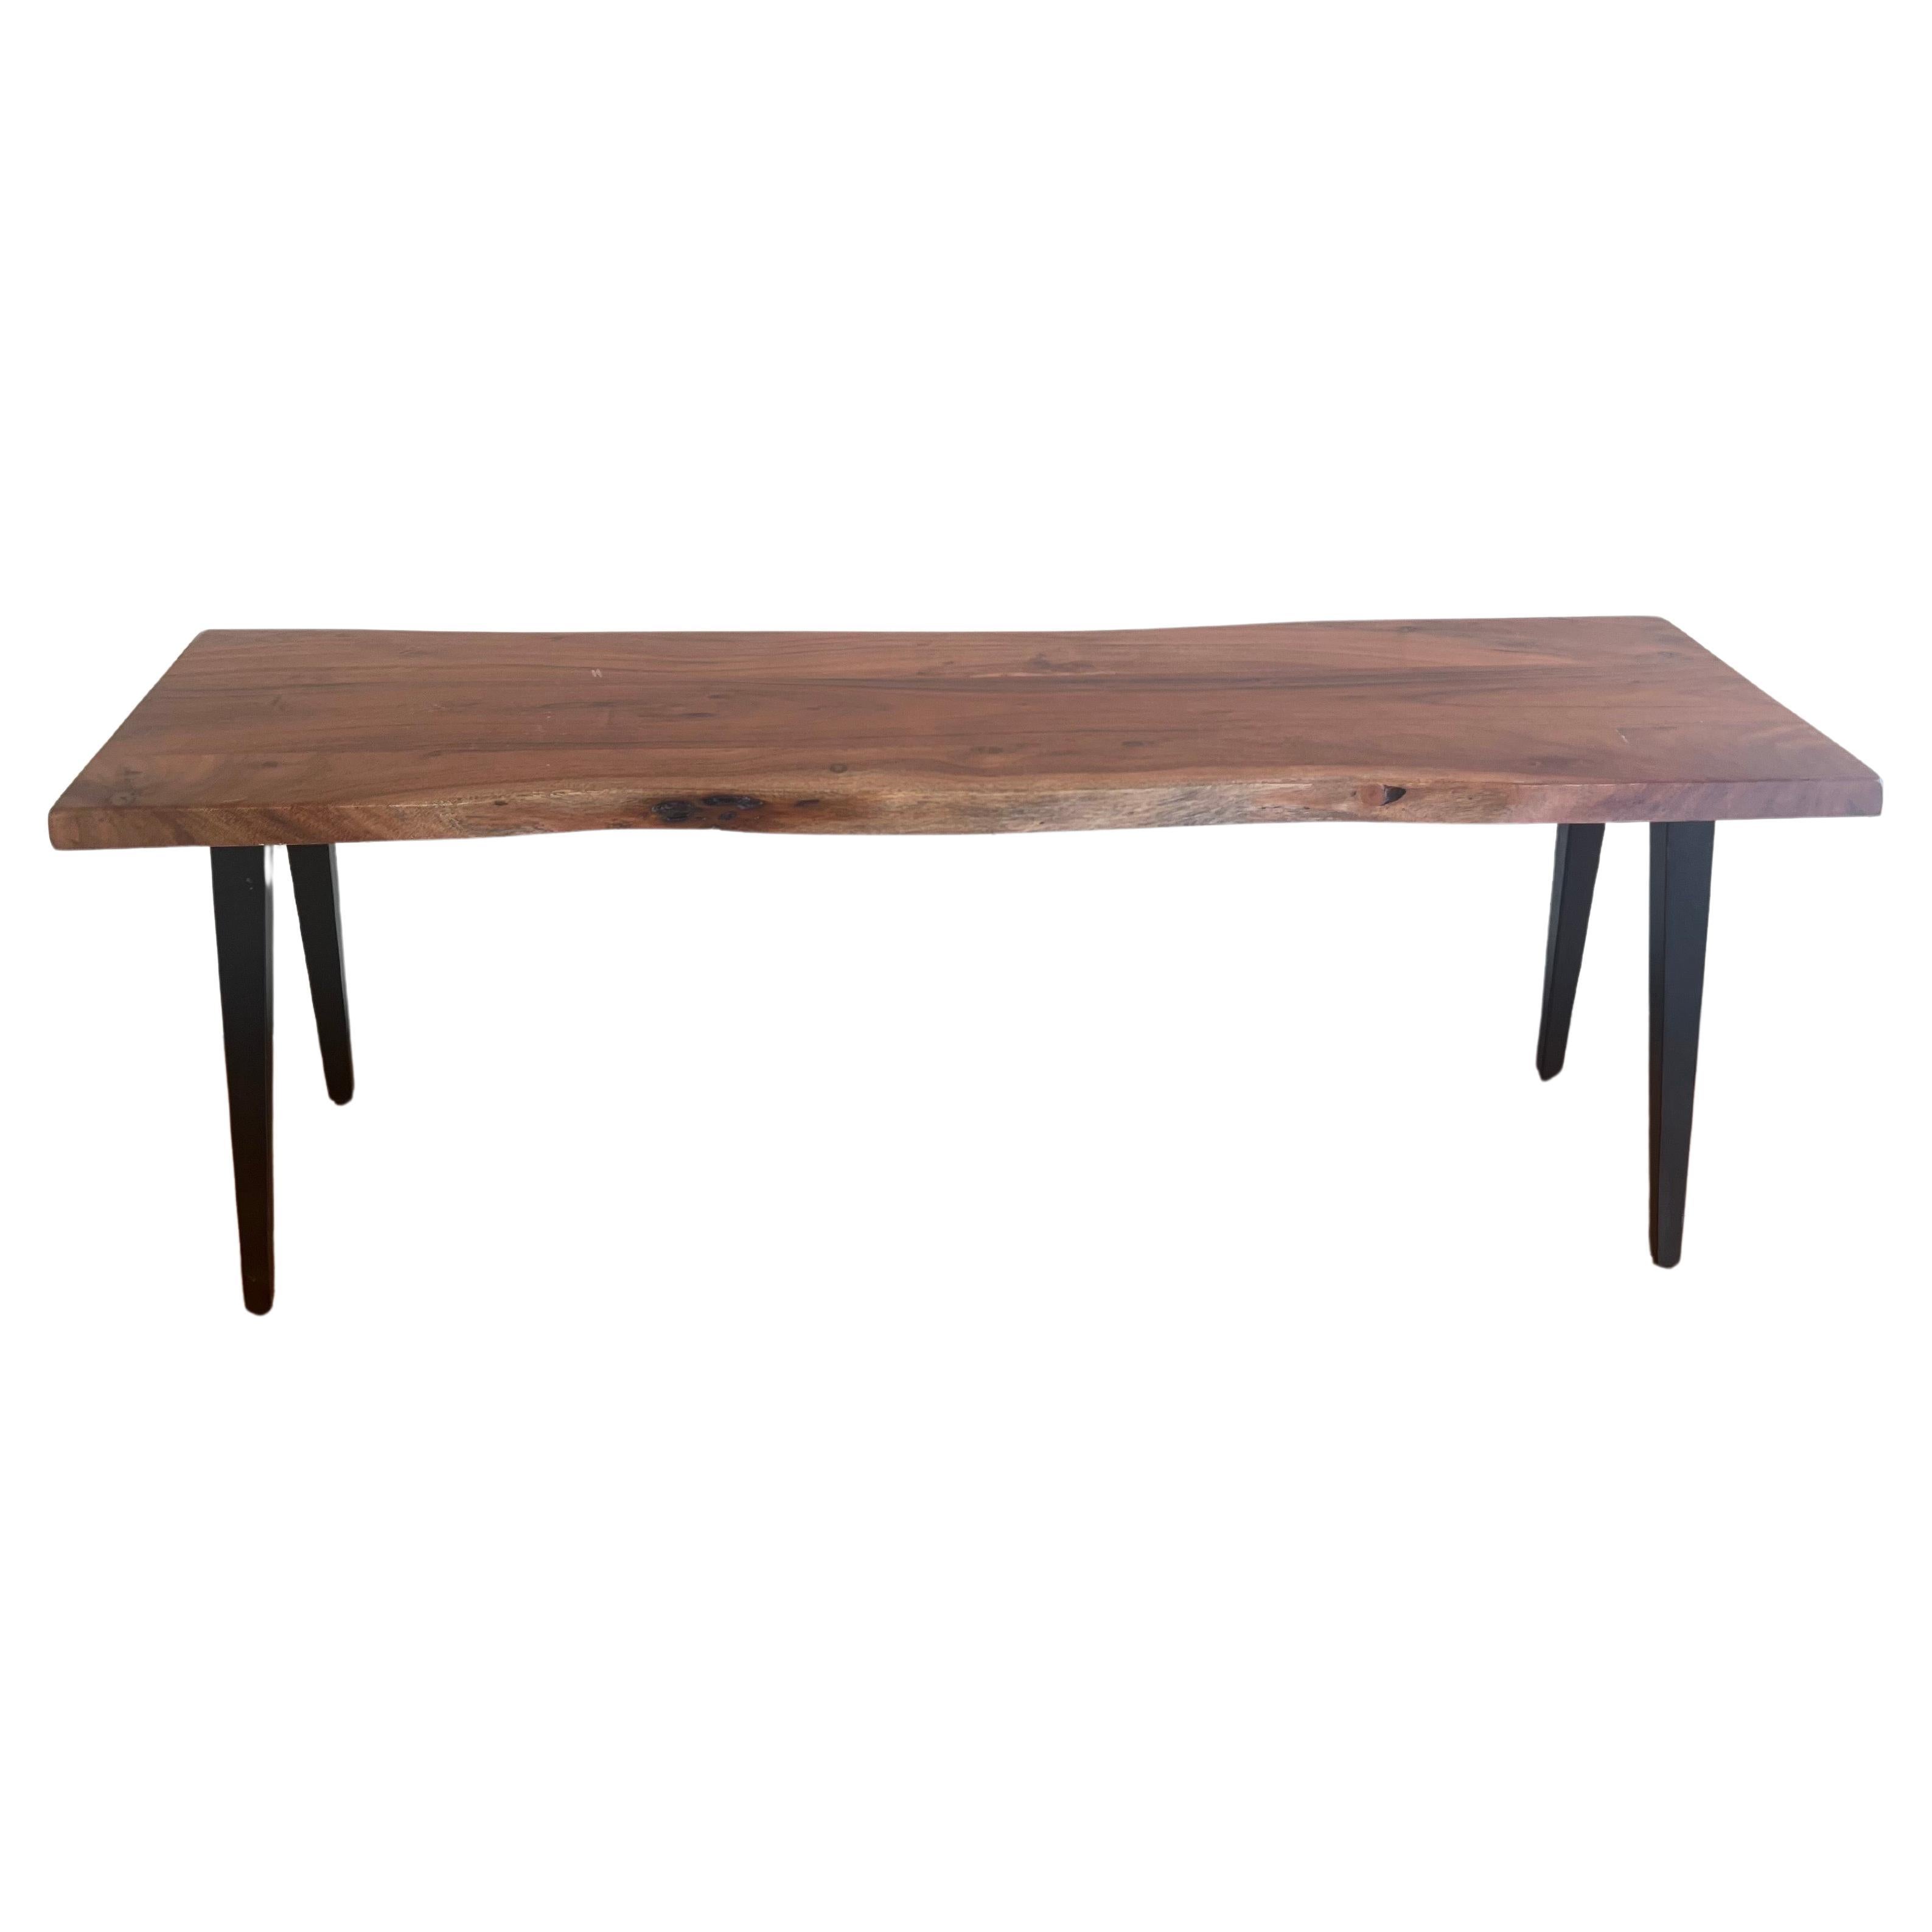 Beautiful Solid Mahogany live edge coffee table/bench with nice black enameled solid metal tapered legs, custom made in 2012 can be used as a coffee table or a bench solid and sturdy, great quality, and in nice condition.